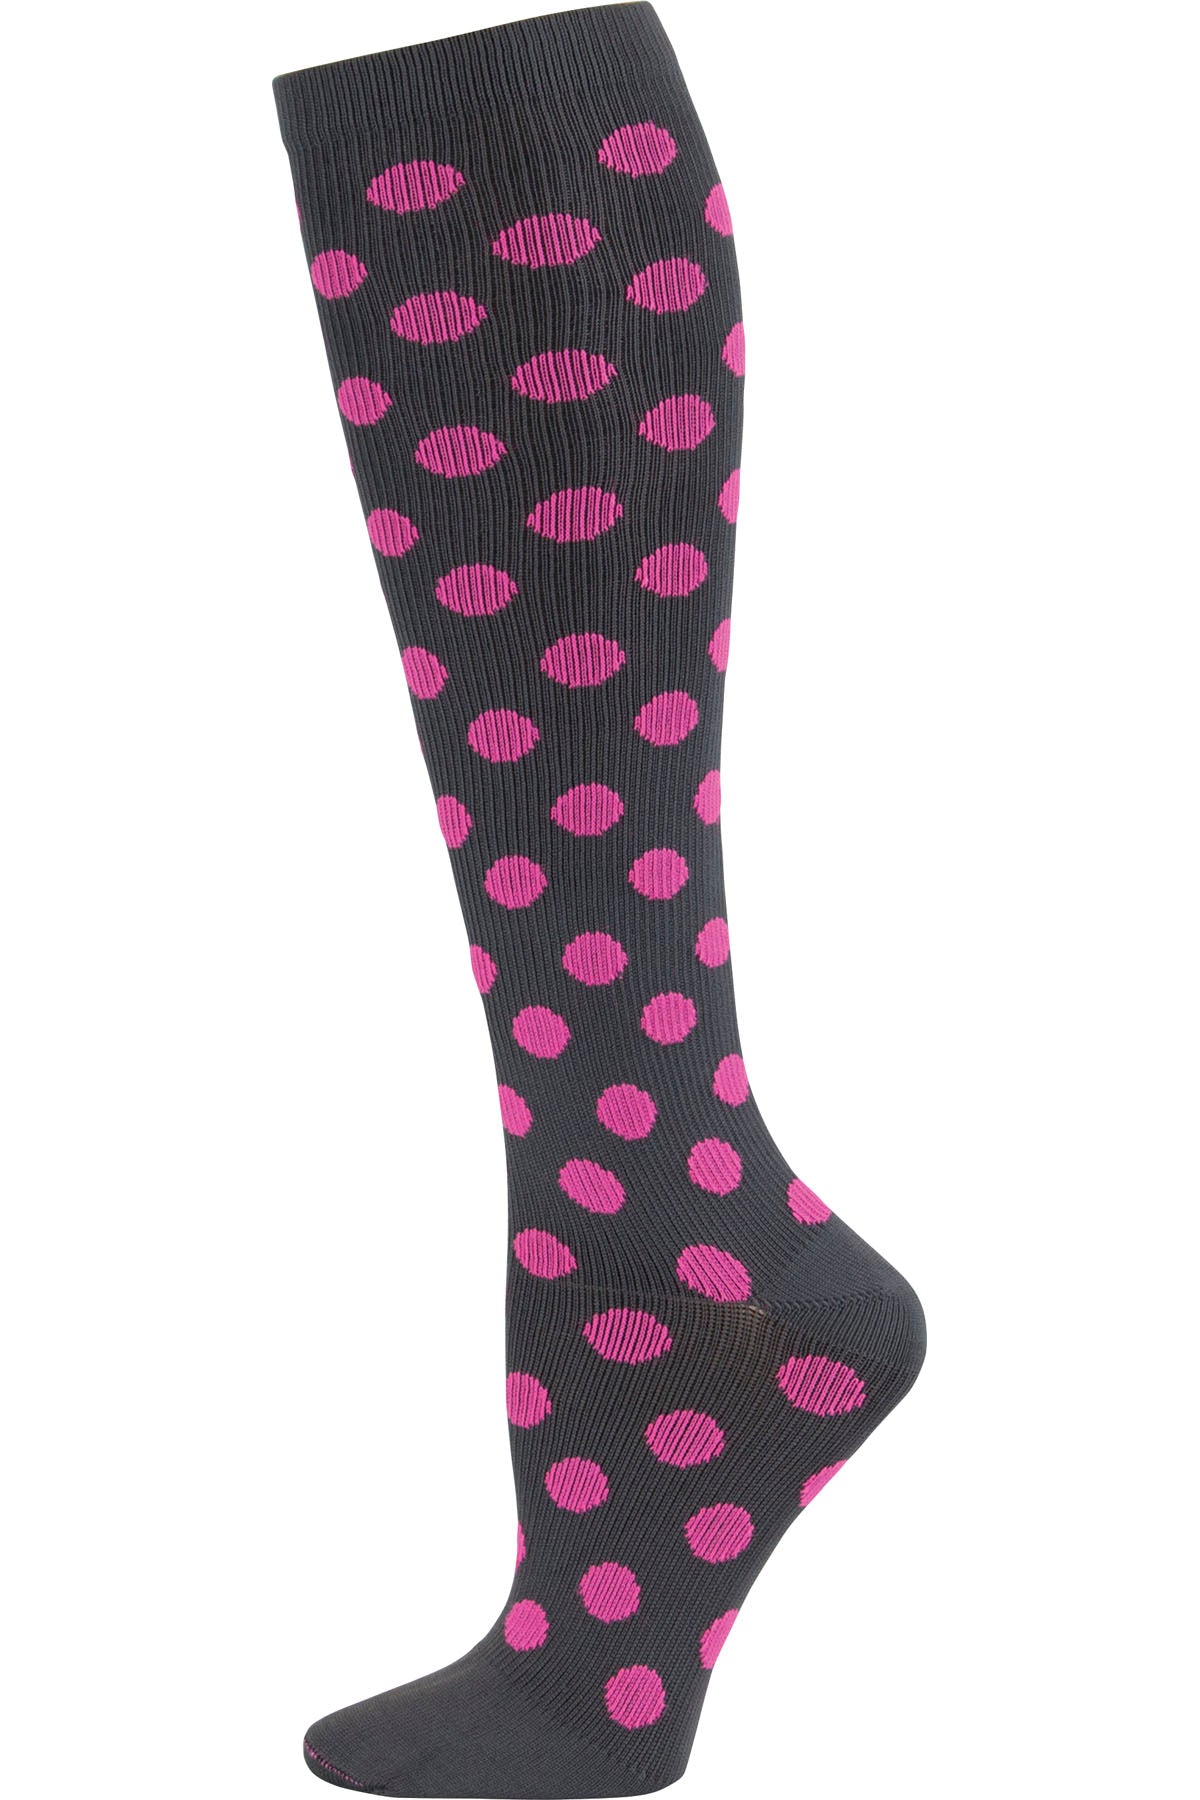 Cherokee Print Support Mild Compression Socks 8-12 mmHg Grey/Pink Polka Dot at Parker's Clothing and Shoes